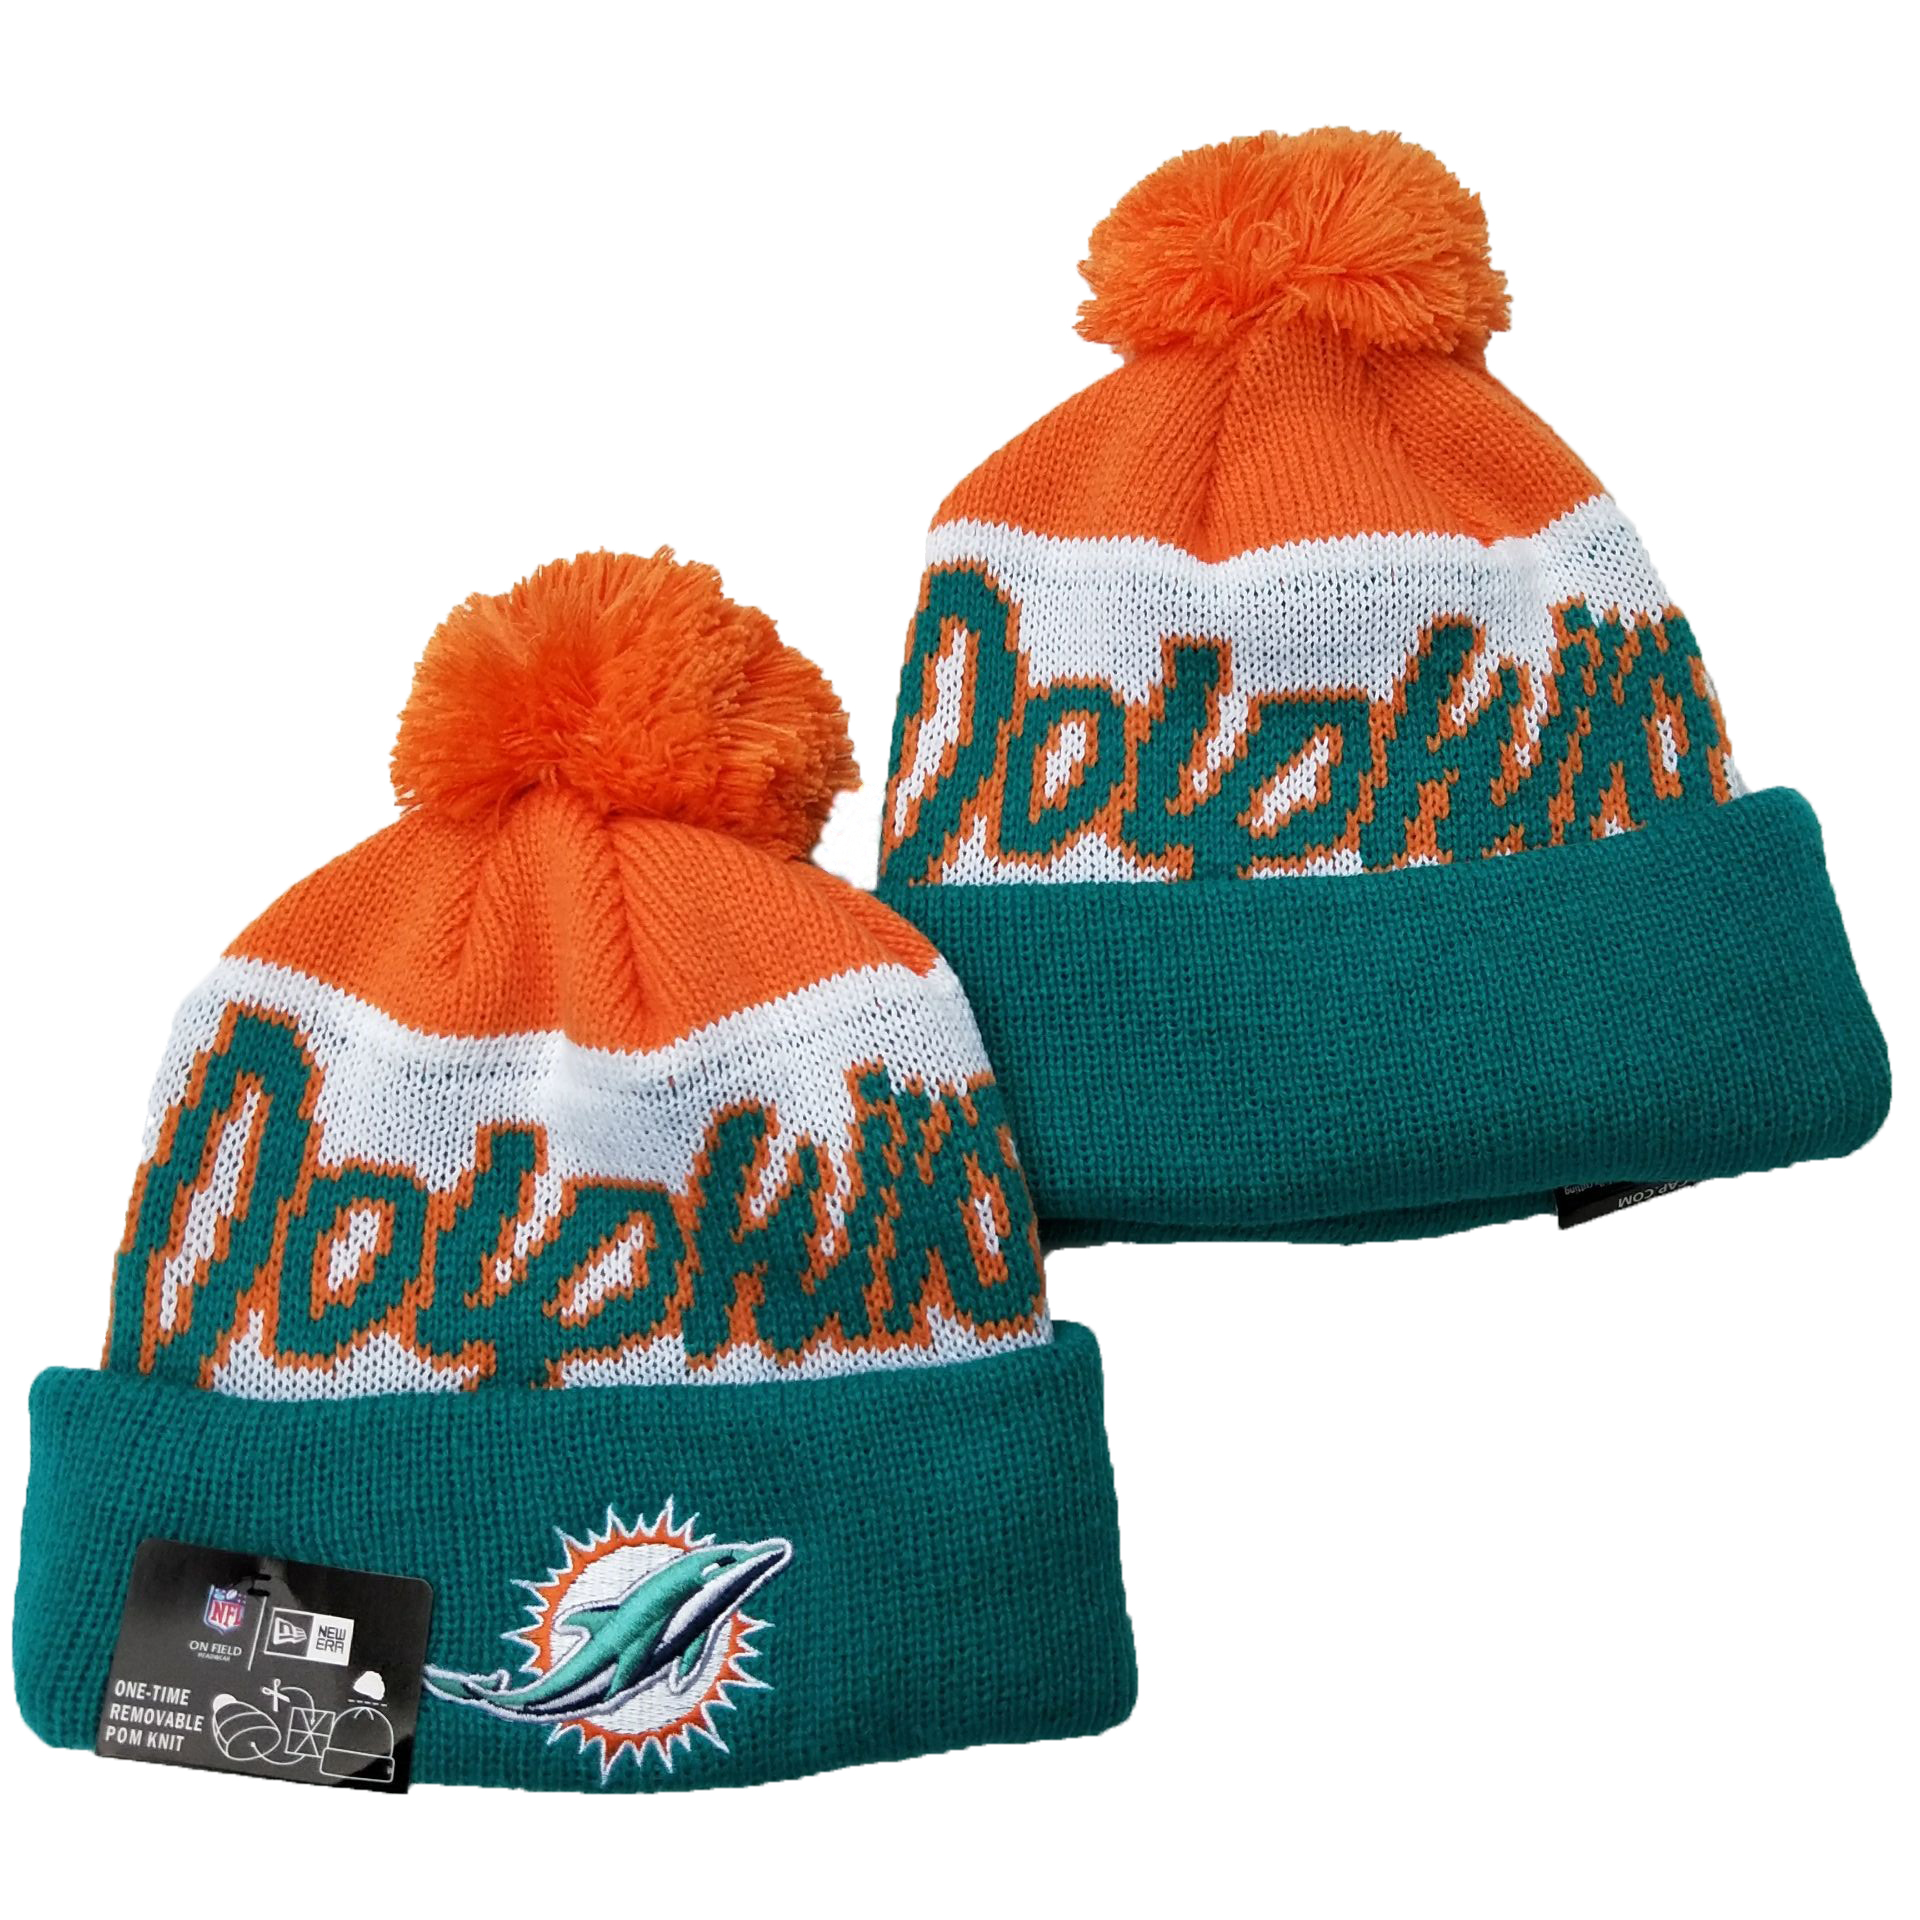 Miami Dolphins Knit Hats 035